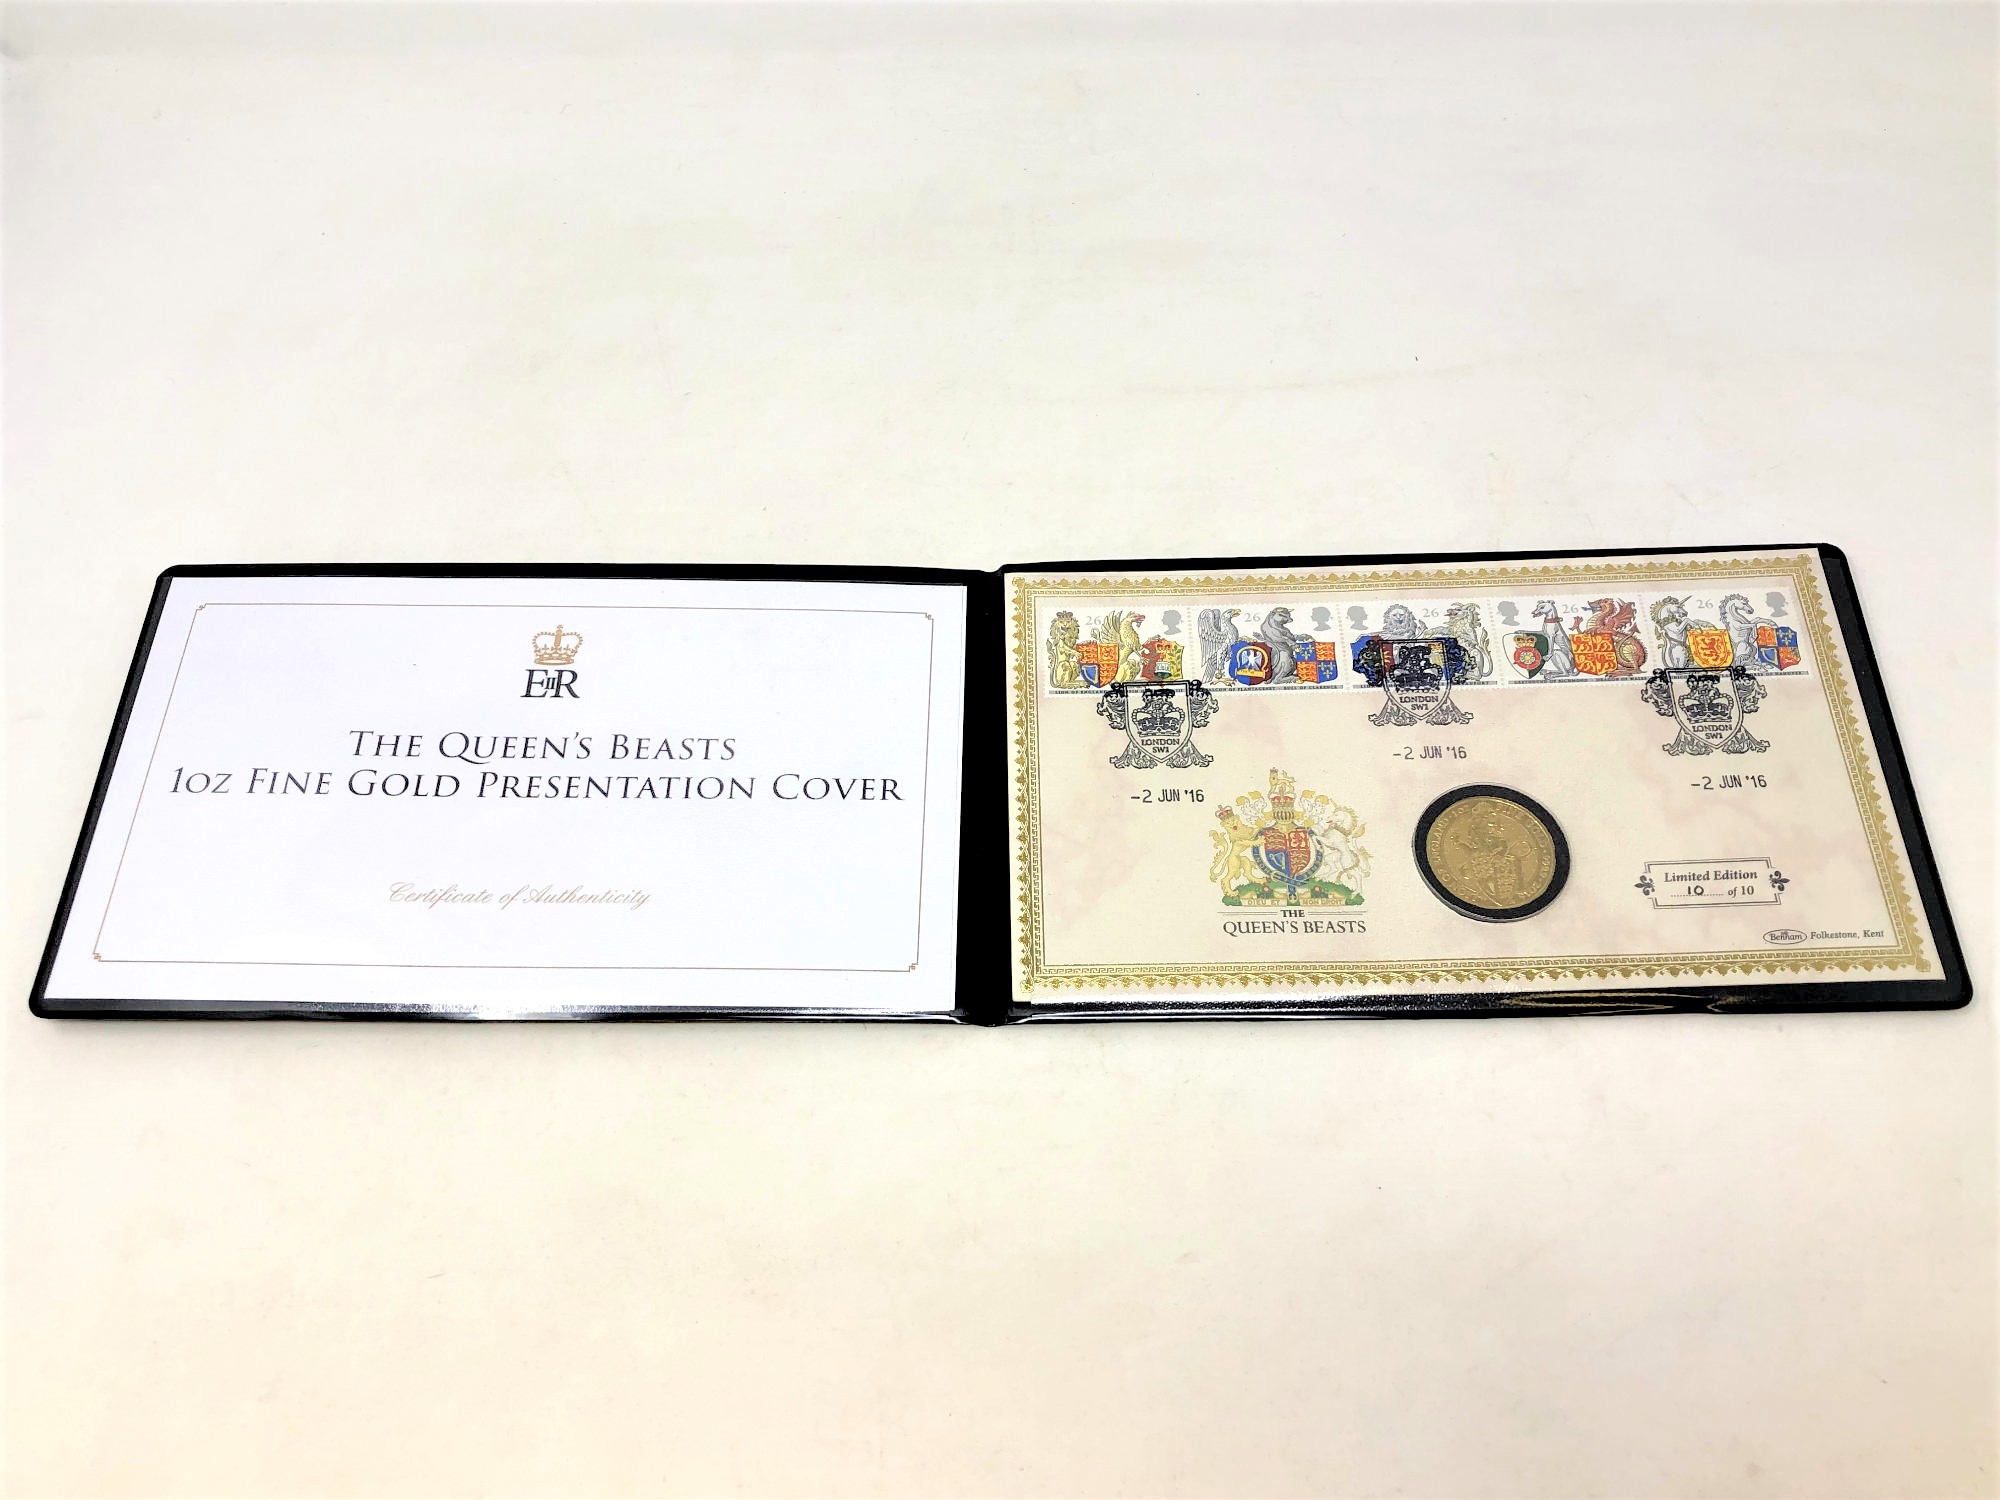 The Queen's Beasts 1oz Fine Gold Presentation Cover, with certificate of authenticity.